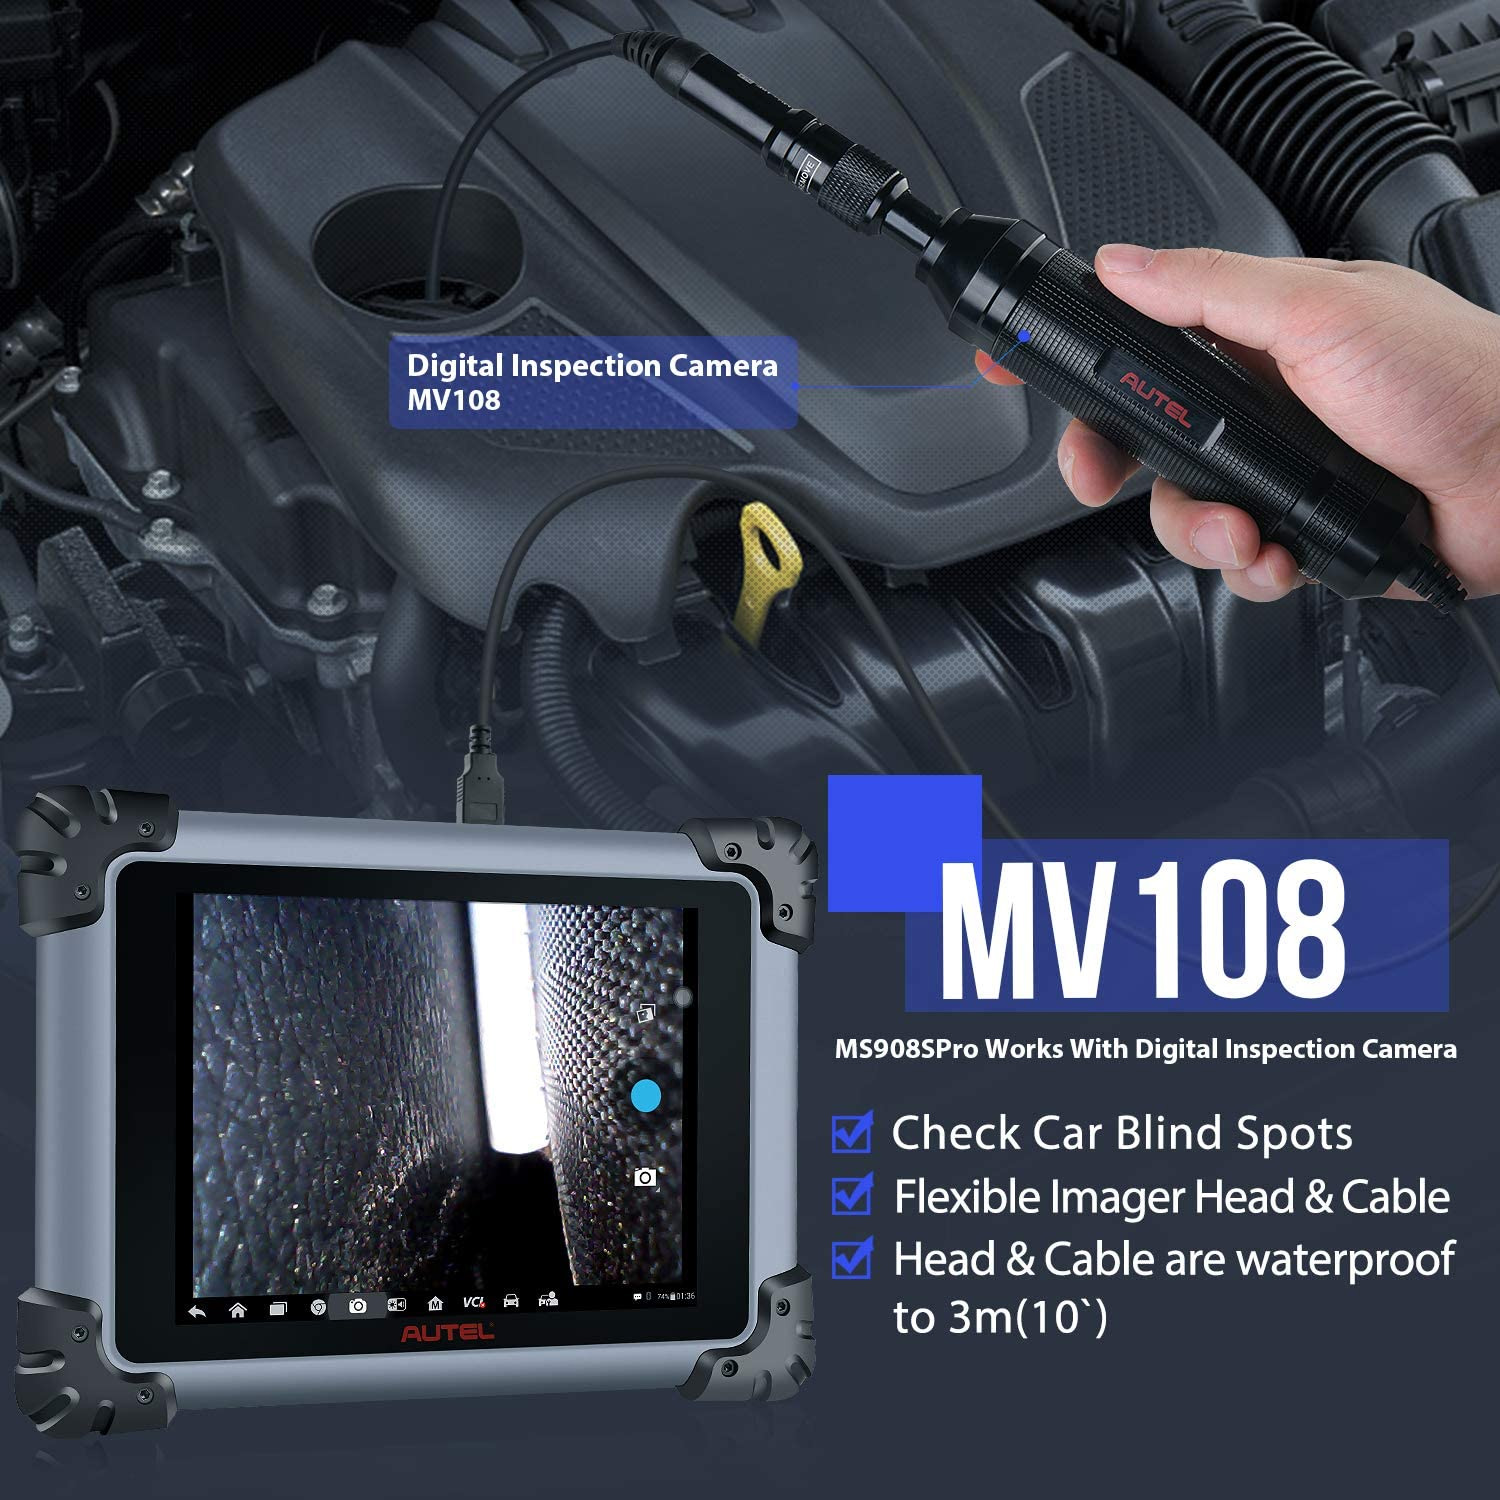 Buy now can send free MV108